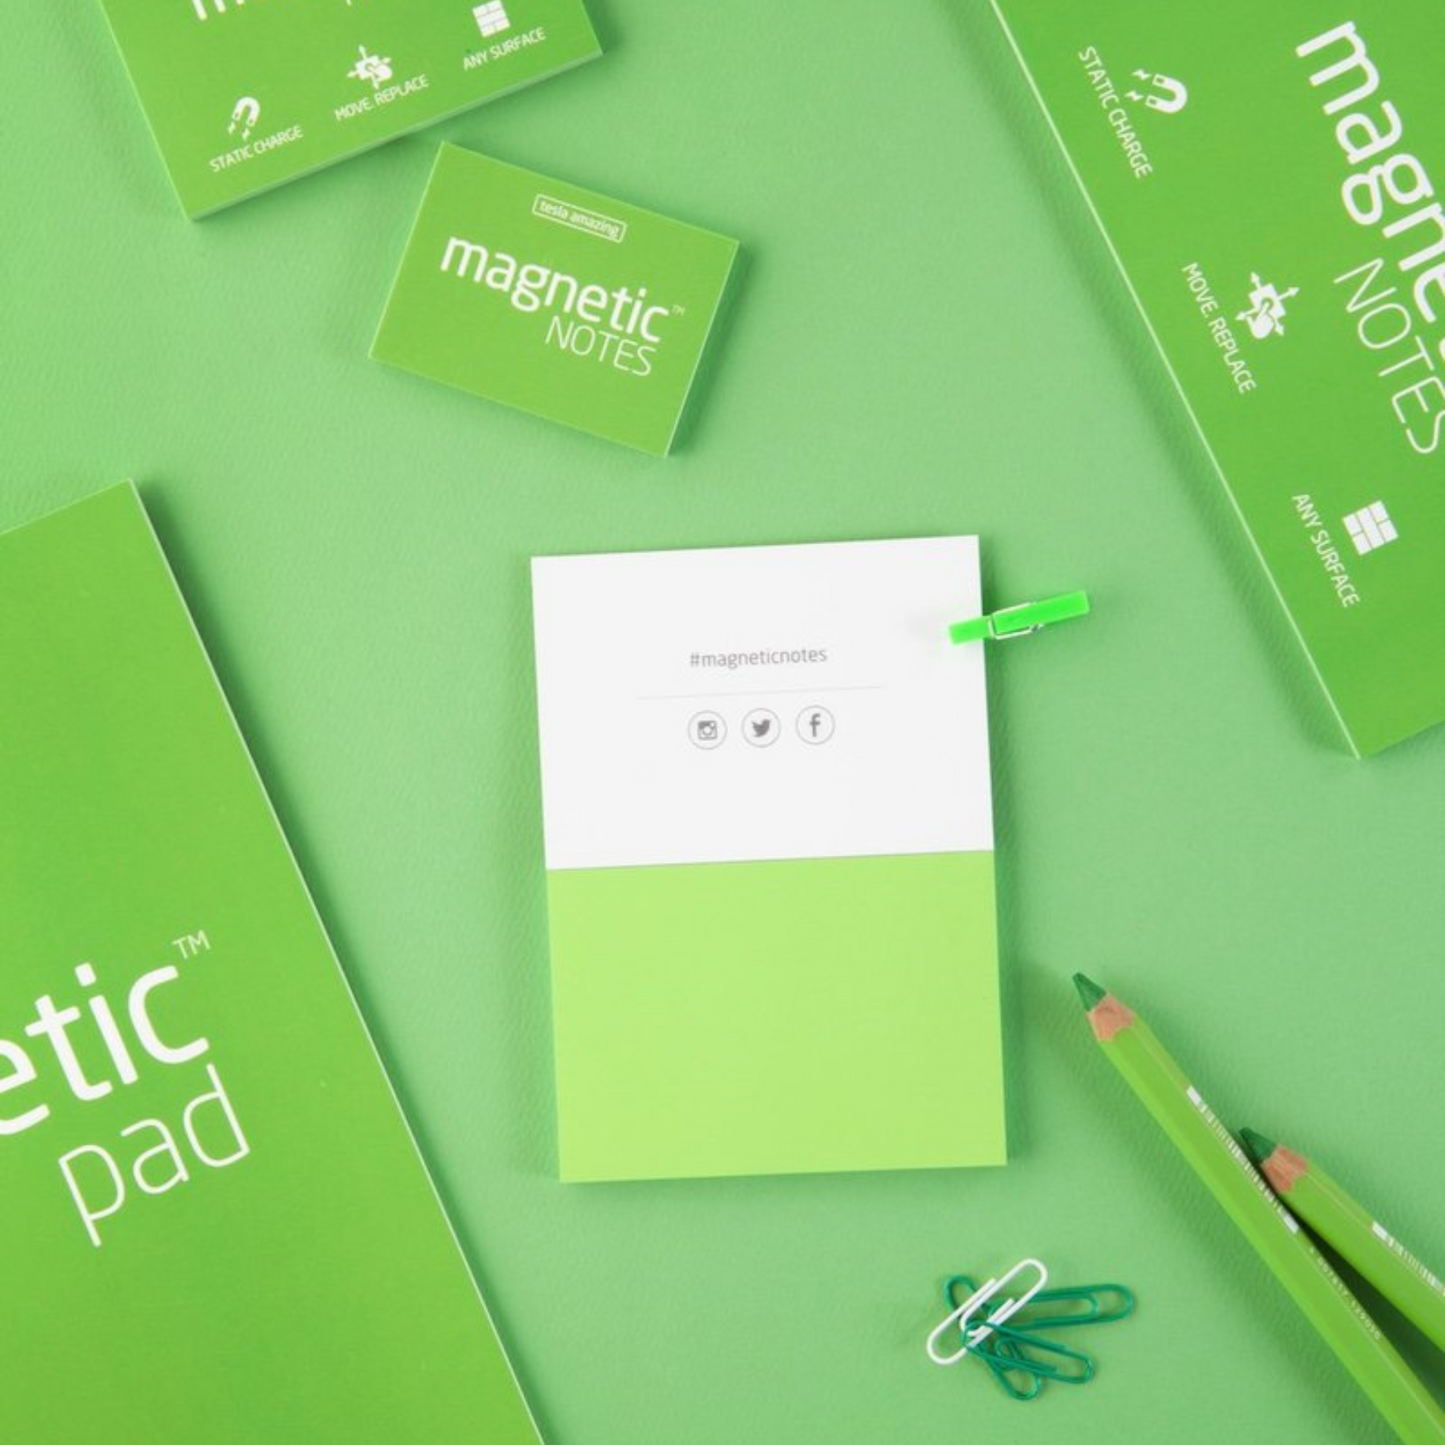 Magnetic Notes - Green